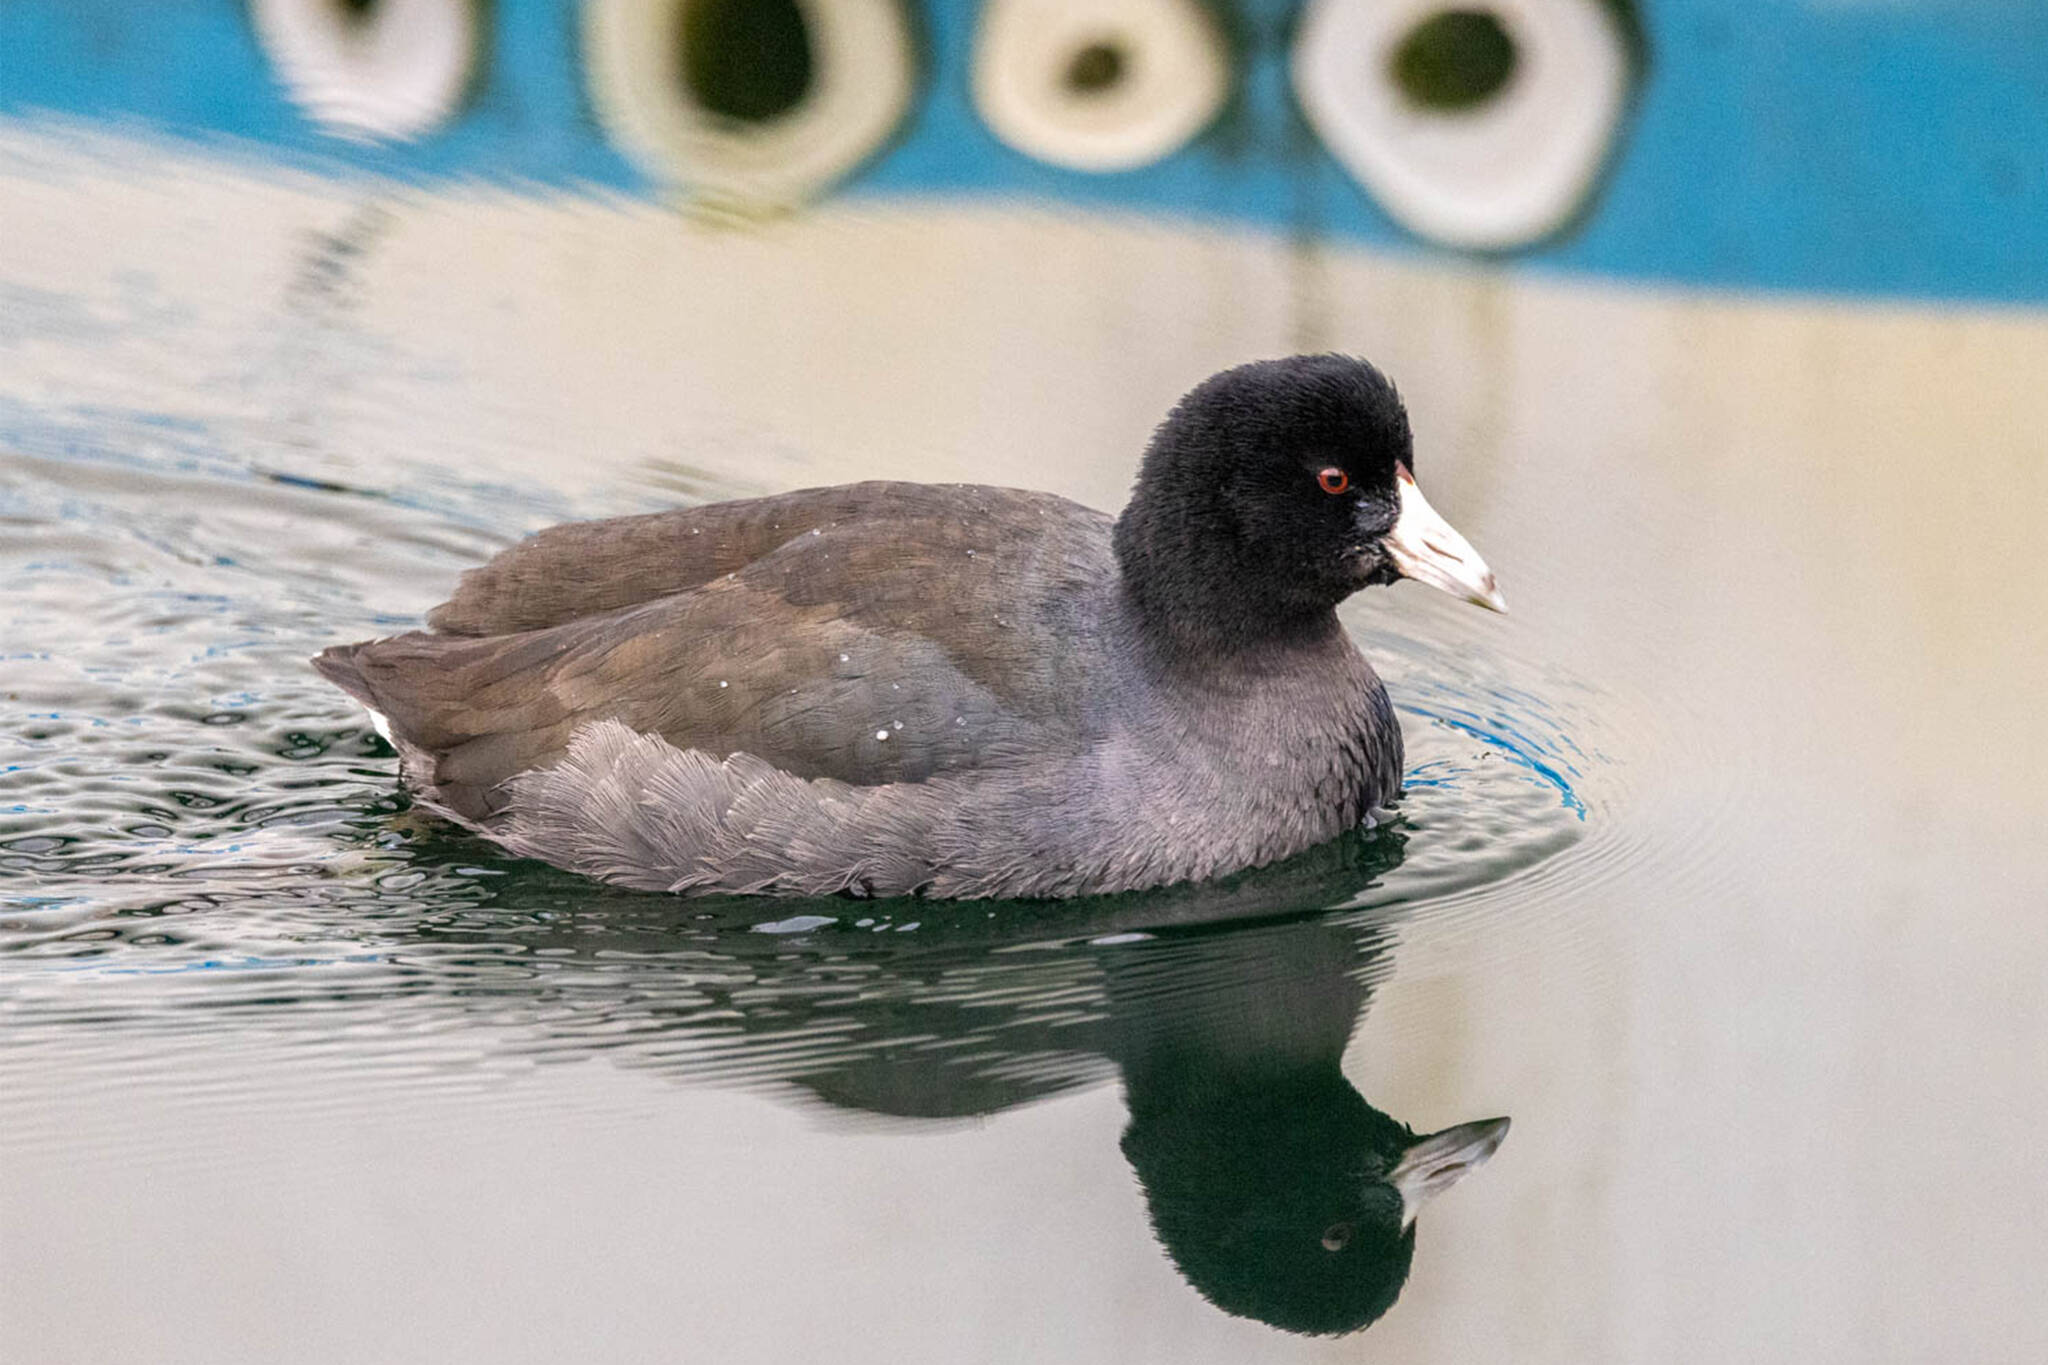 An American coot spent time in Auke Bay this winter, farther north than usual. (Courtesy Photo / Kerry Howard)